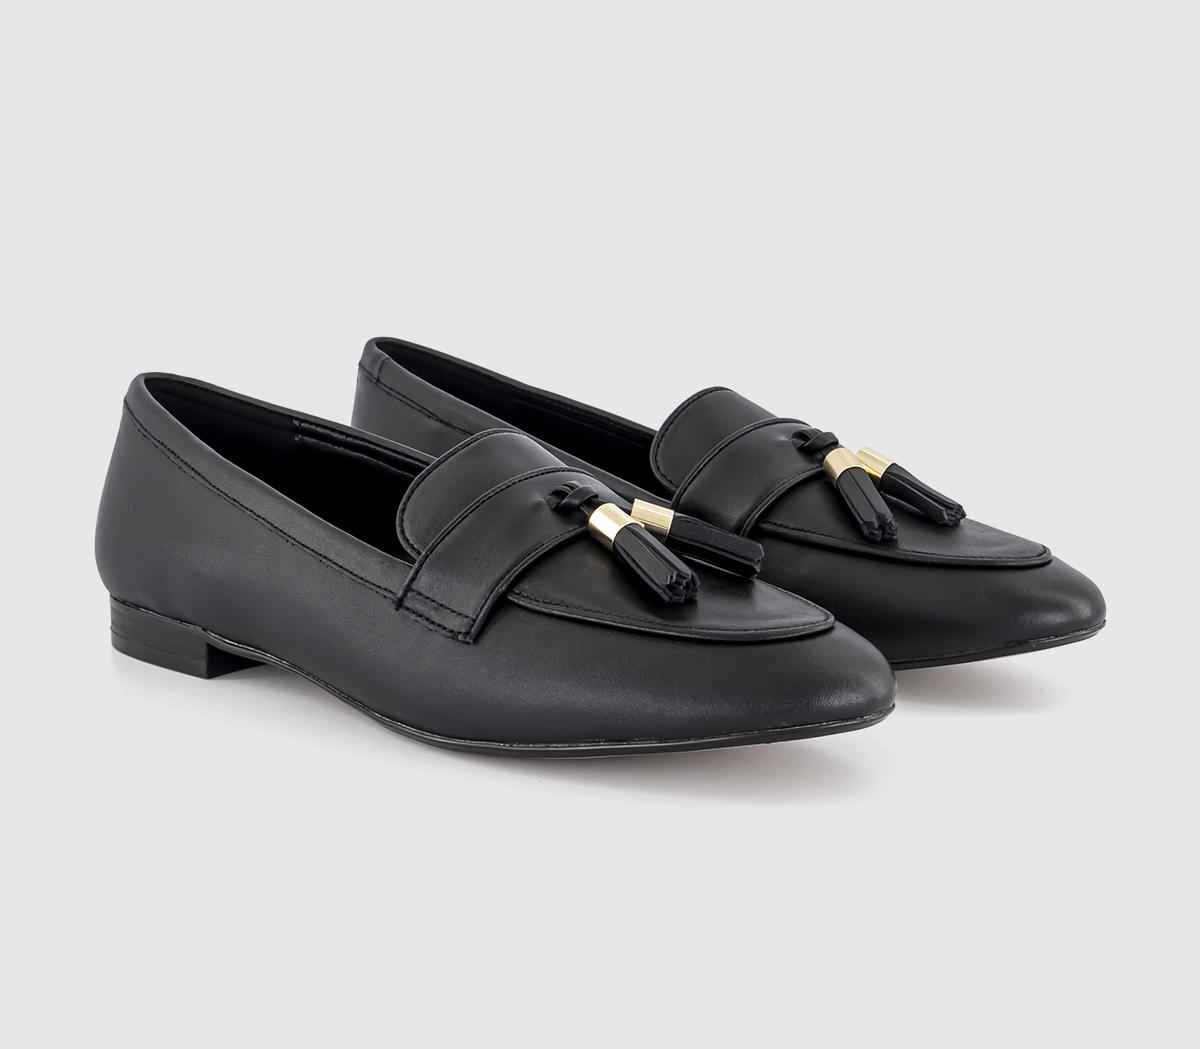 OFFICE Fine Line Leather Tassel Loafers Black Leather - Flat Shoes for ...